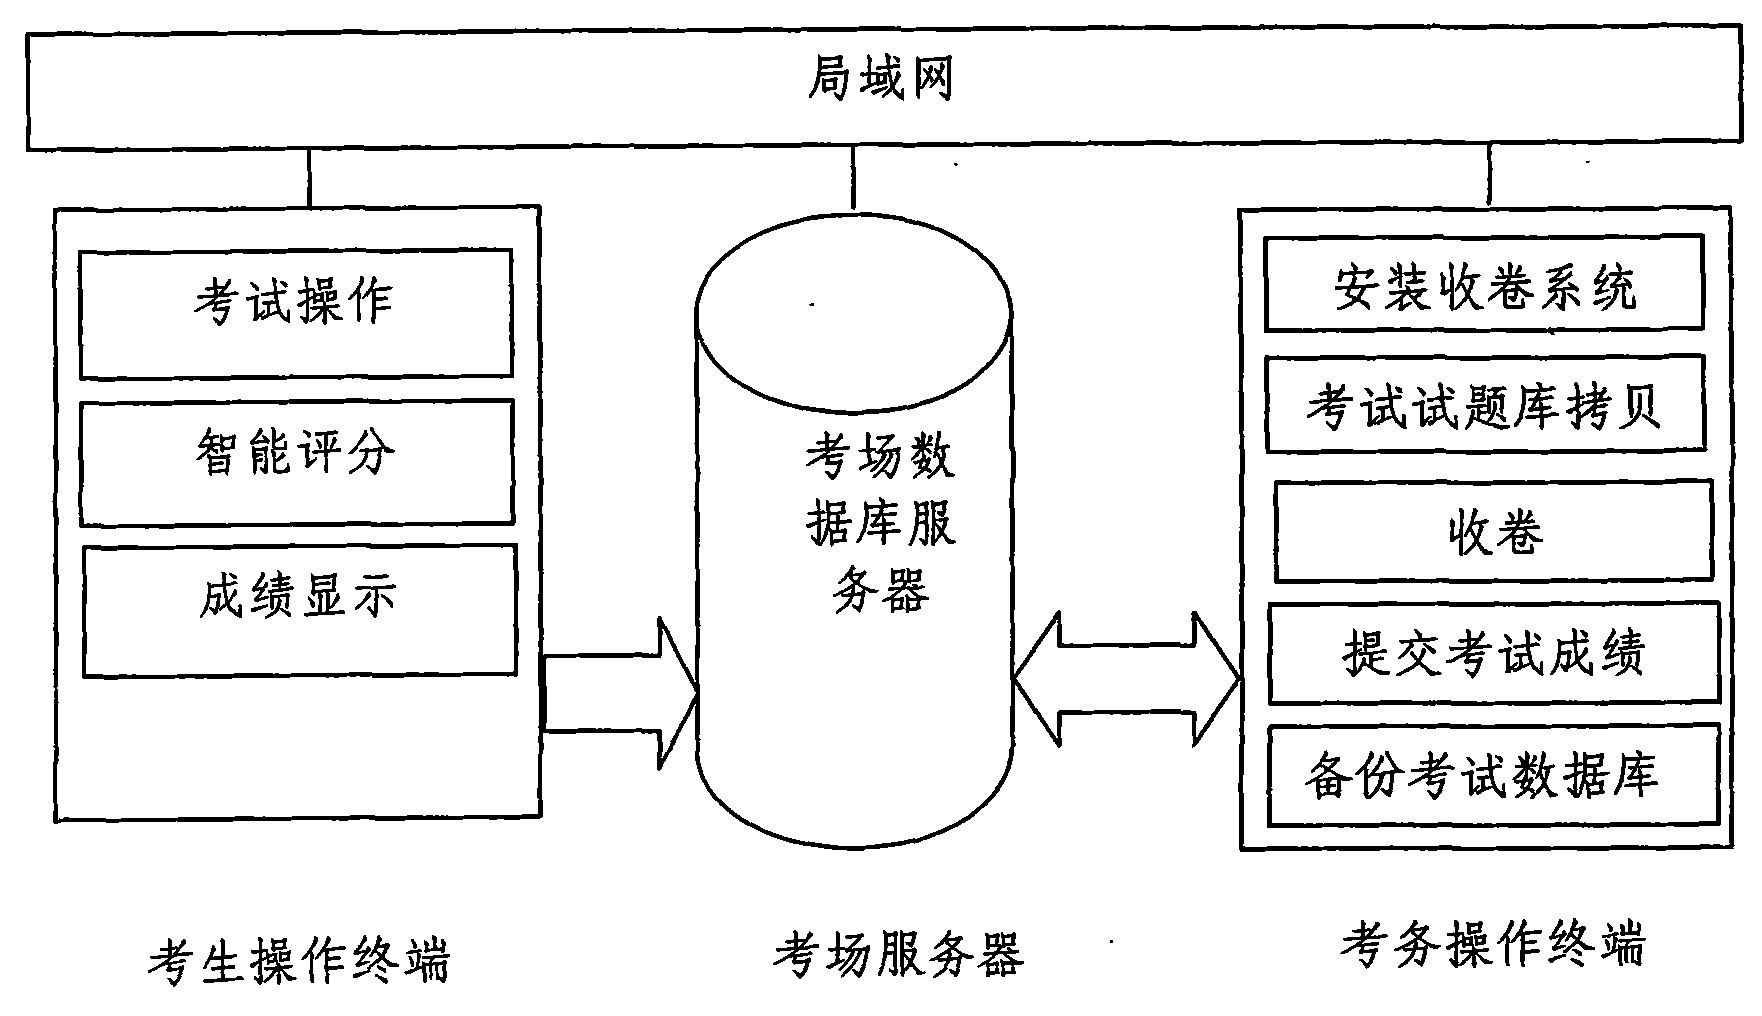 Local area network-based network examination system and implementation method thereof